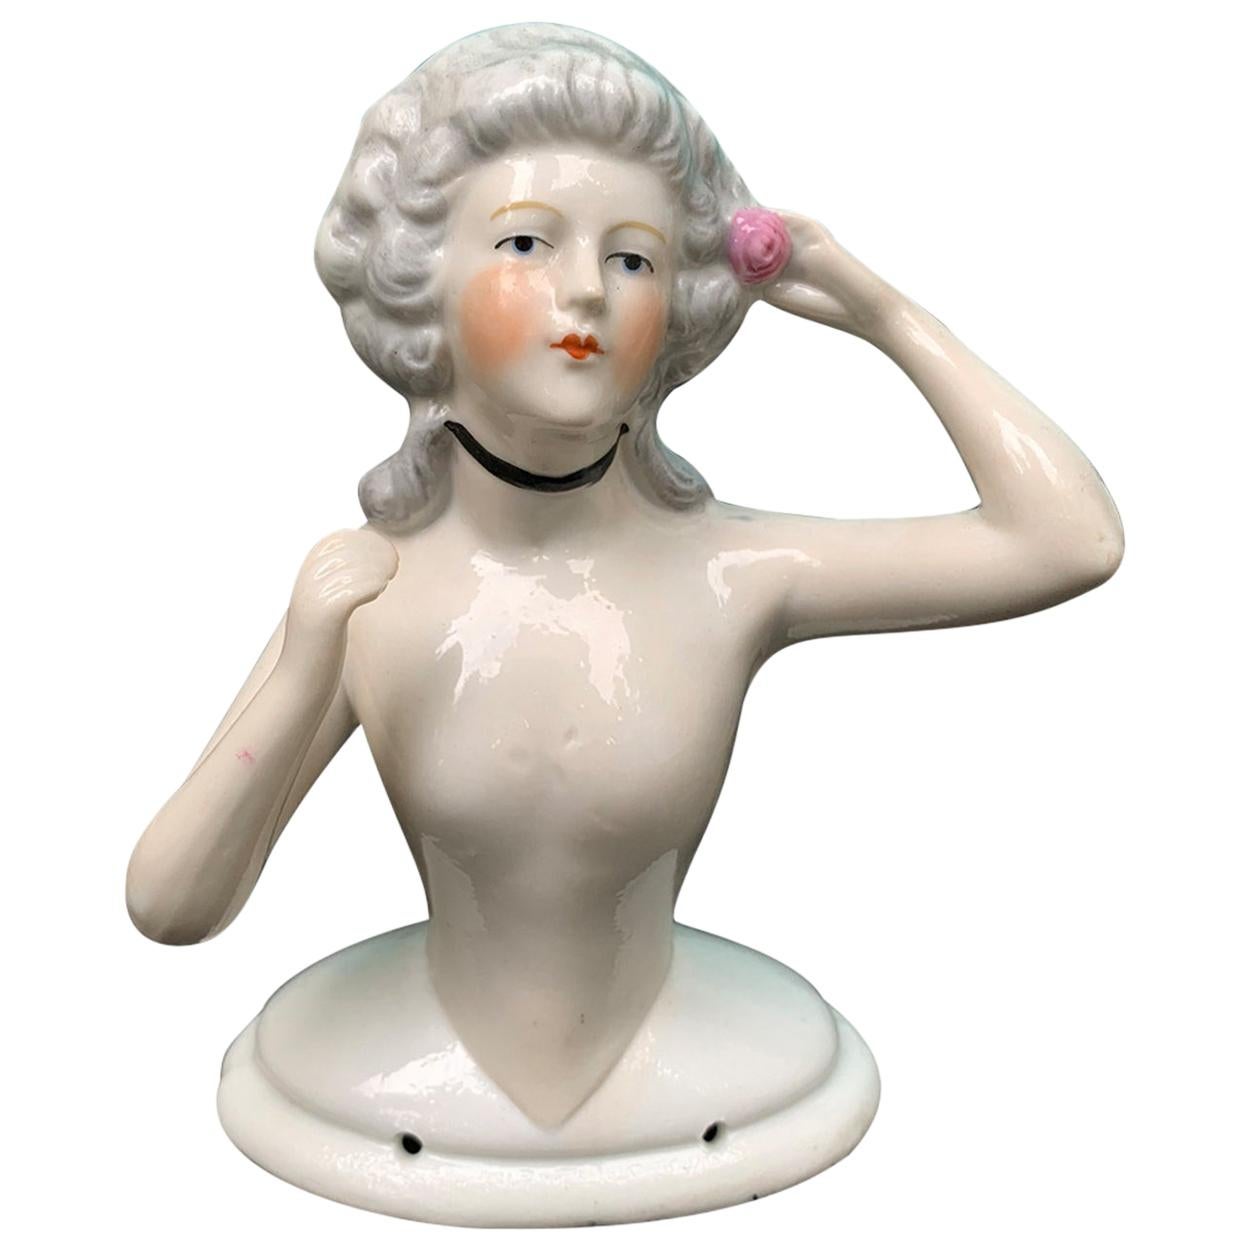 Early 20th Century German Porcelain Marie Antoinette Style Half-Doll Figure For Sale